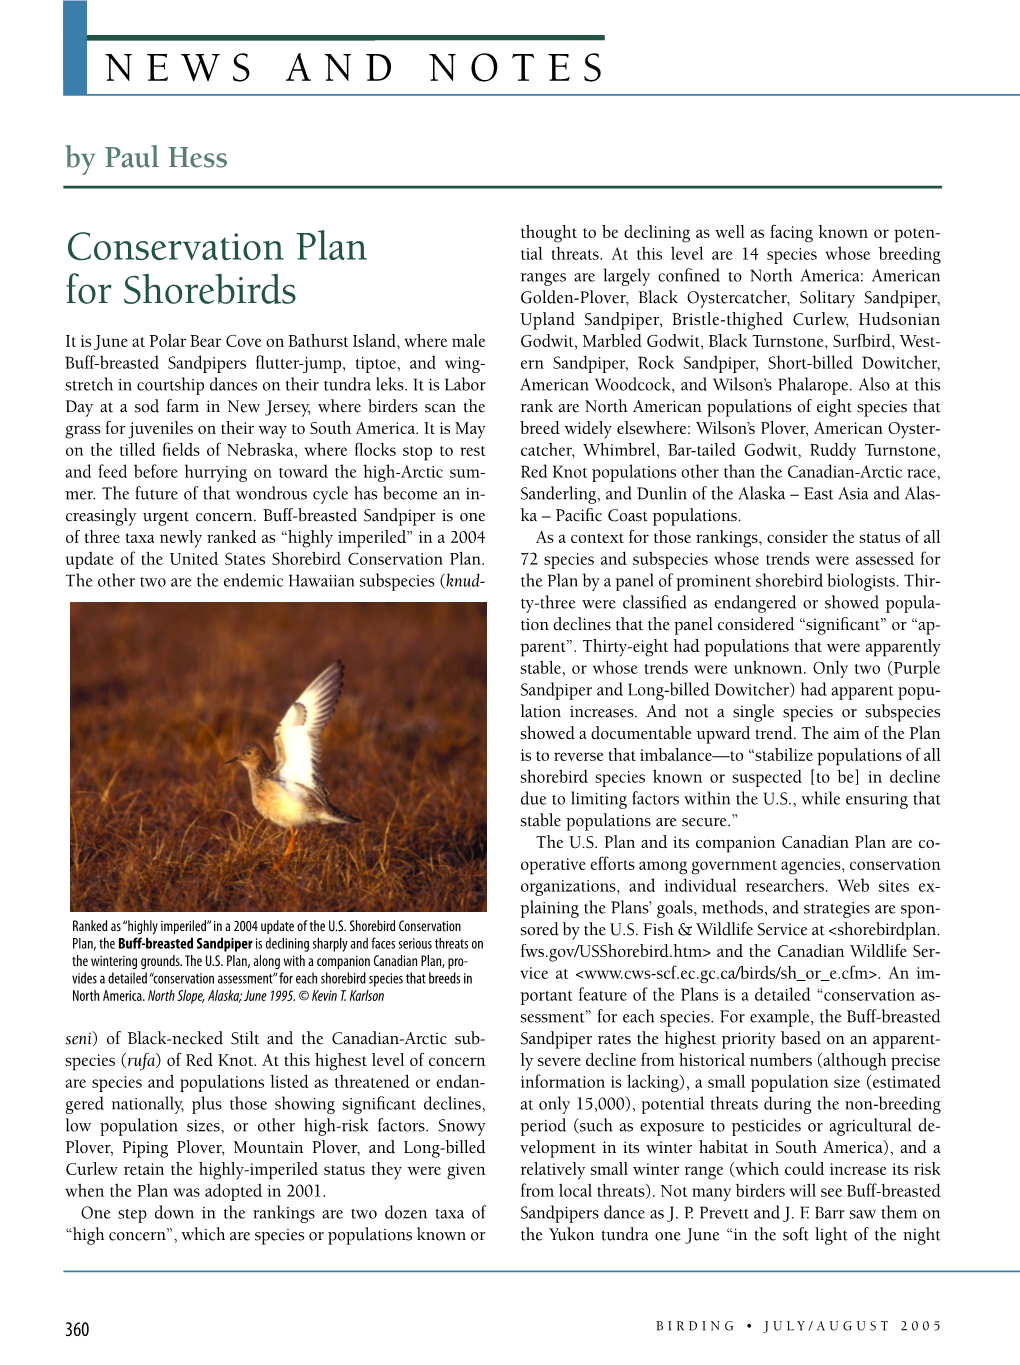 BIRDING • JULY/AUGUST 2005 Hours When the Sun Was Low in the Sky” (Wilson Bulletin 88:500–503)